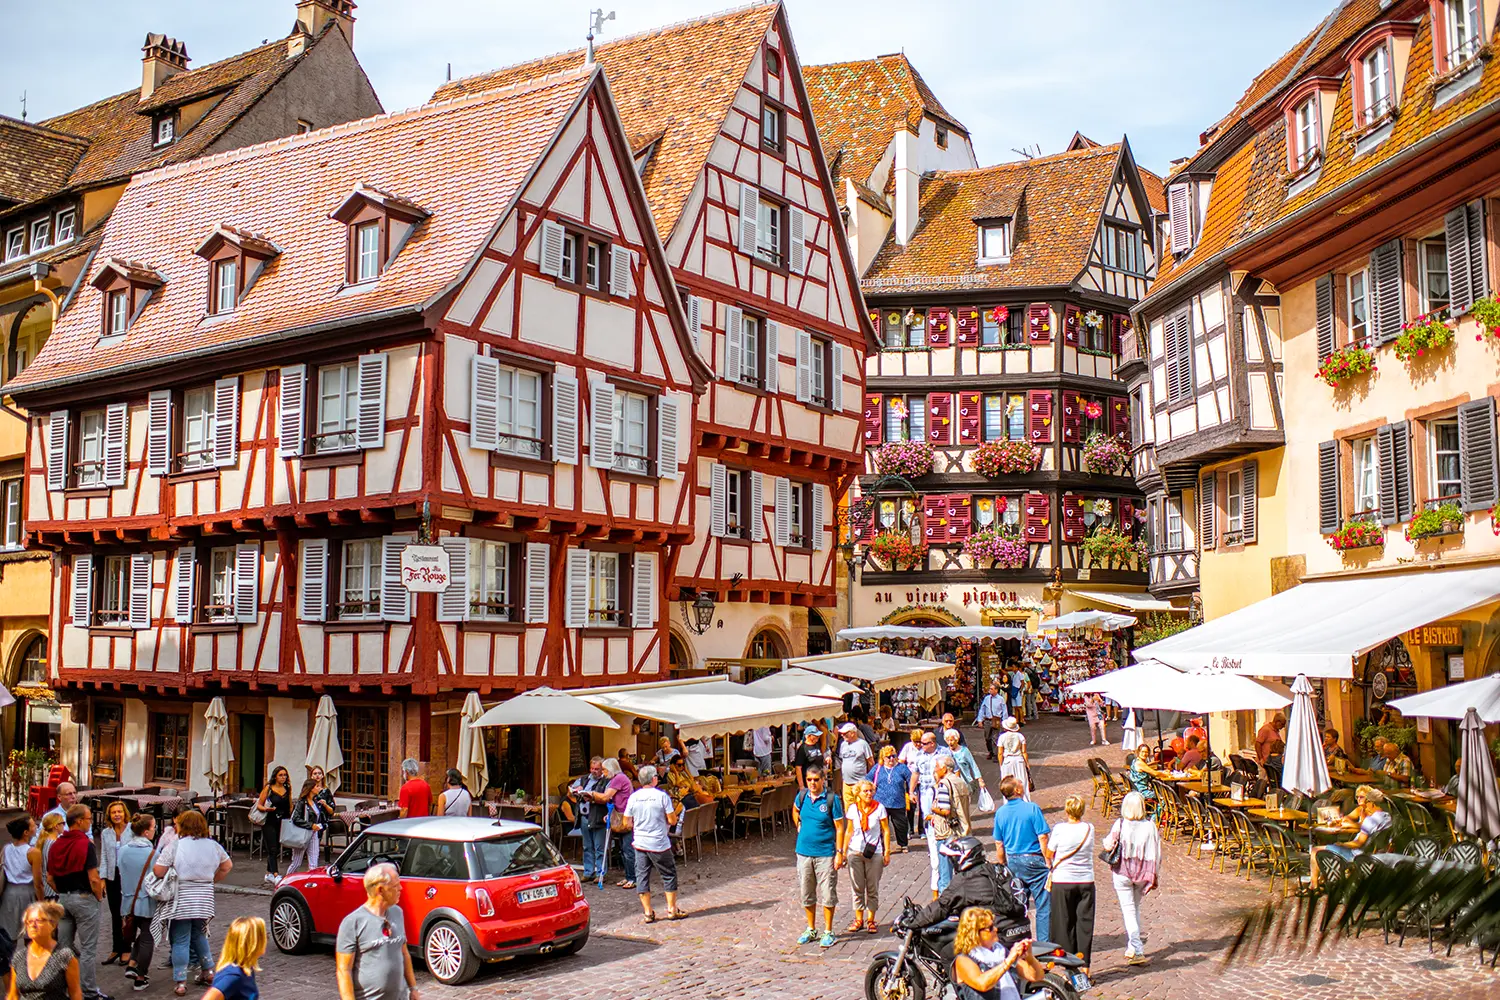 Cityscaspe view on the old town with beautiful half-timbered houses and crowded streets in Colmar, famous french town in Alsace region